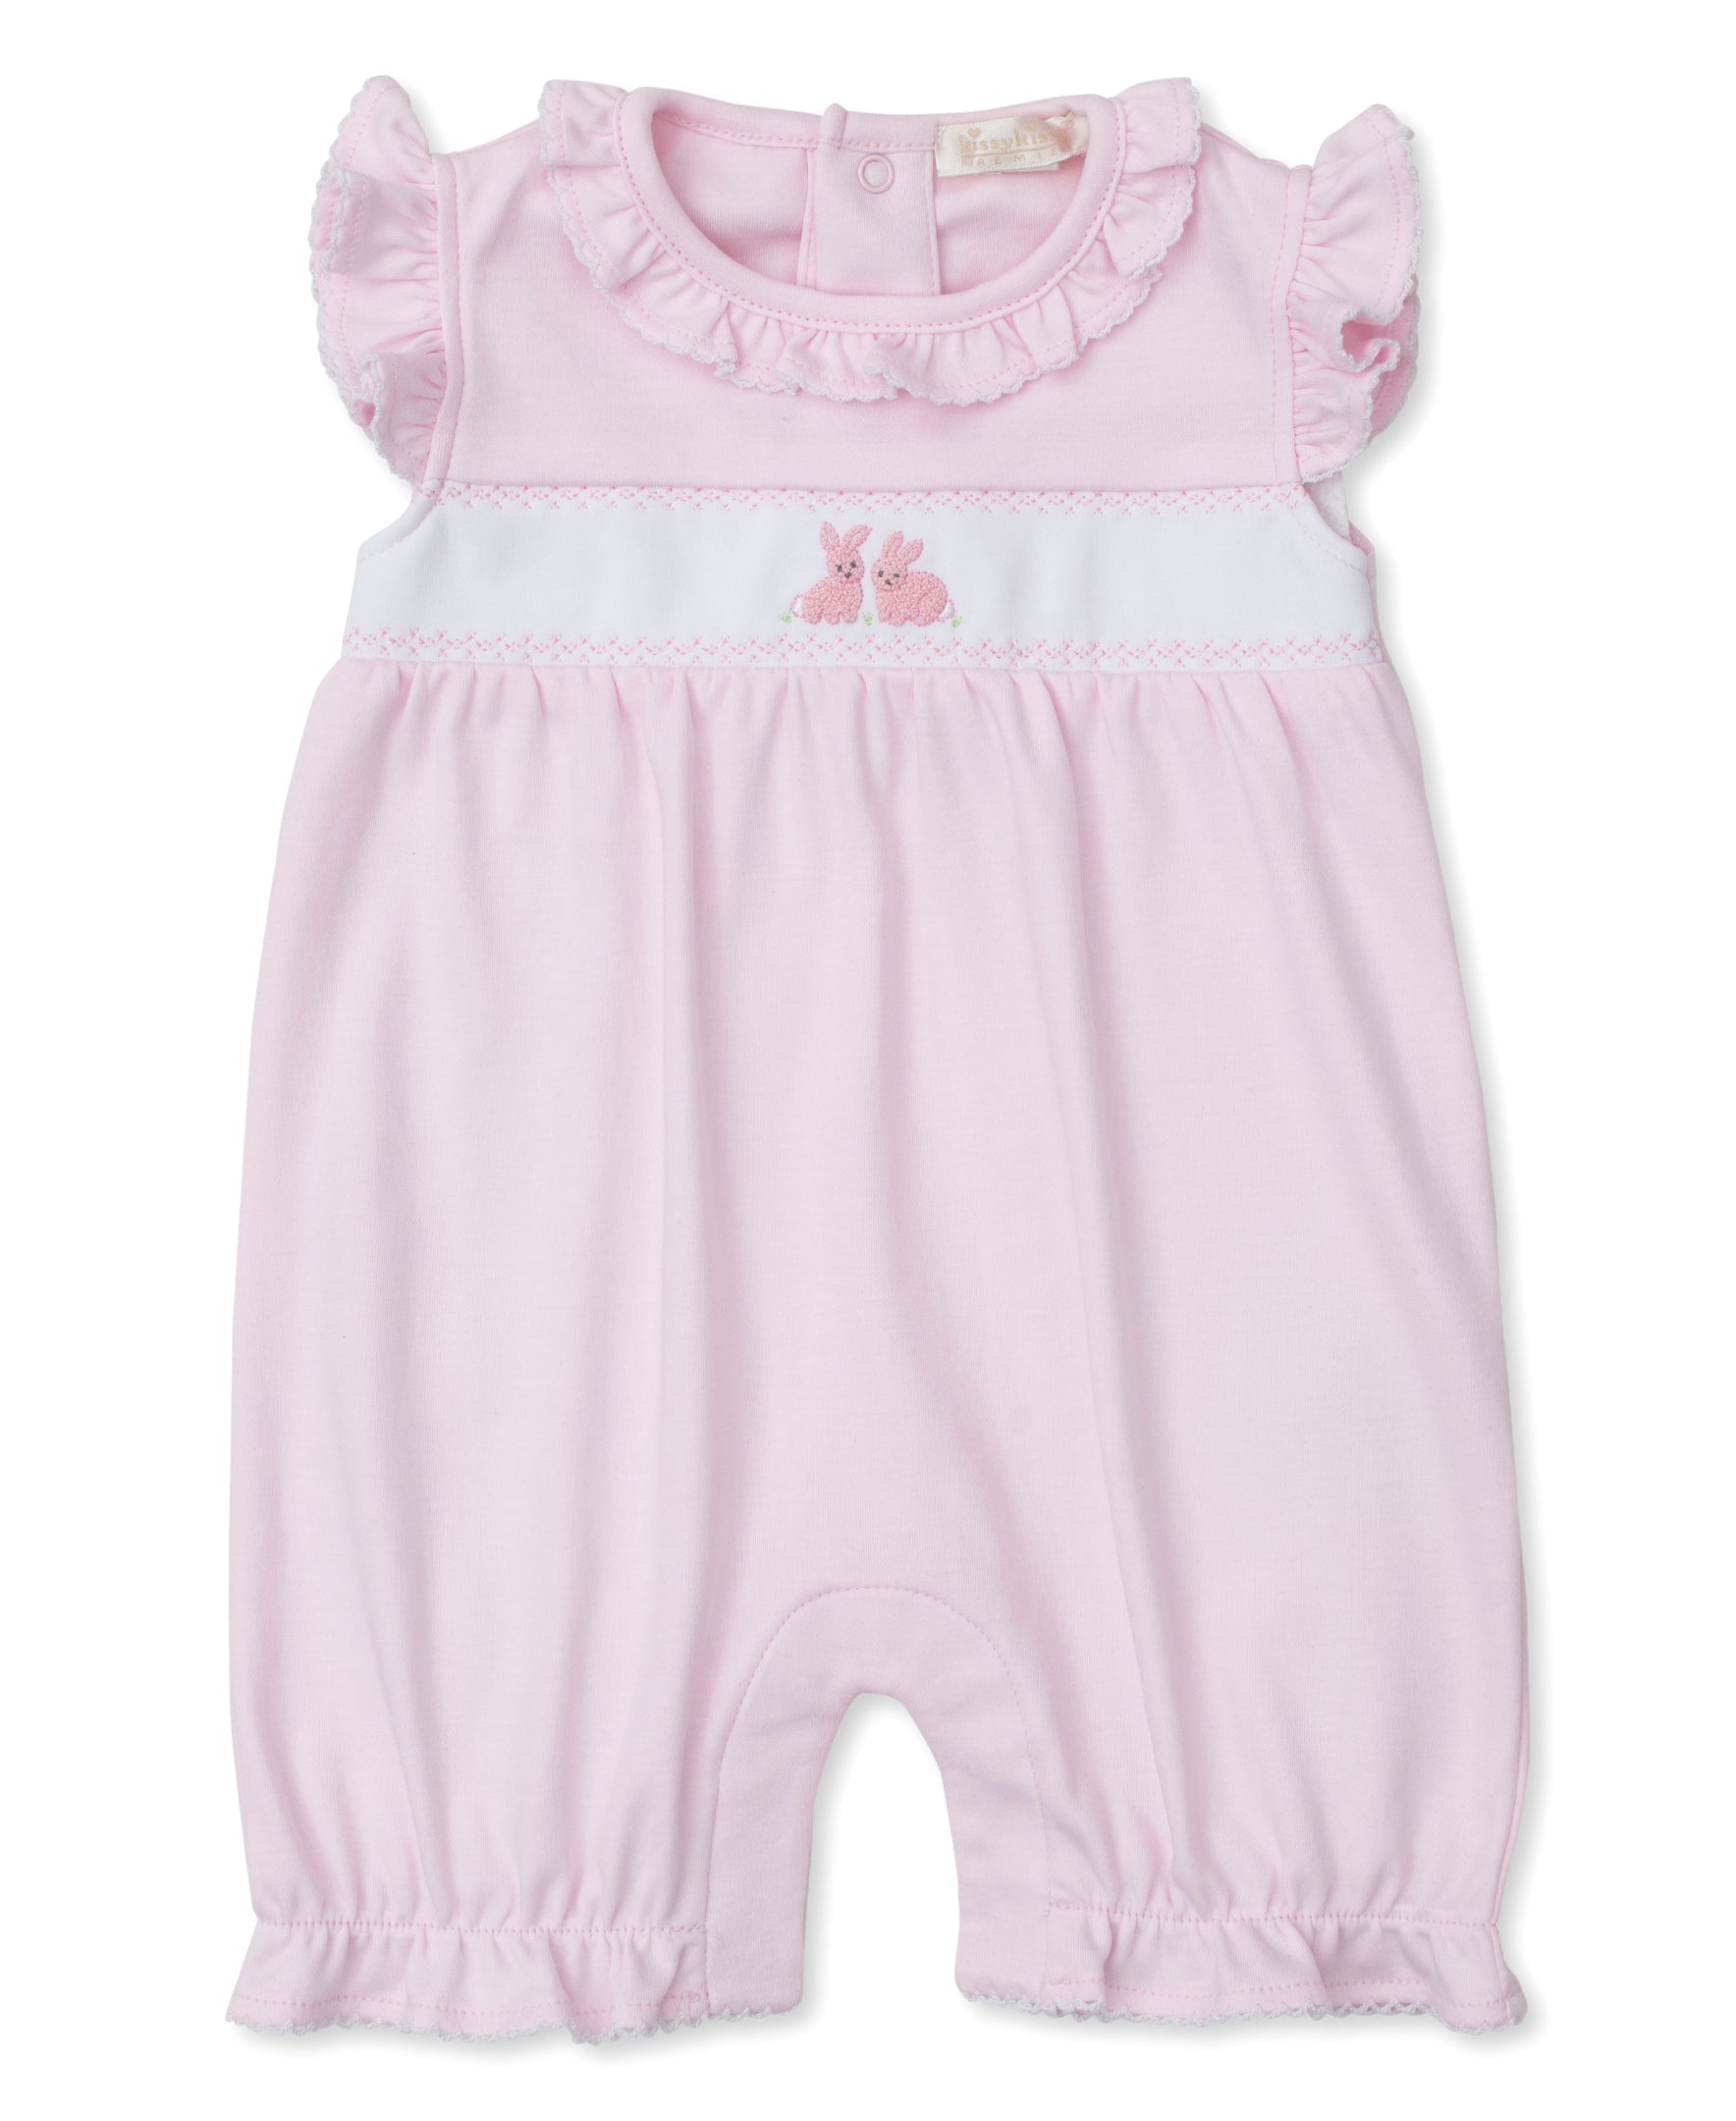 Premier Cottontail Hollows Pink Hand Emb Playsuit - Kissy Kissy